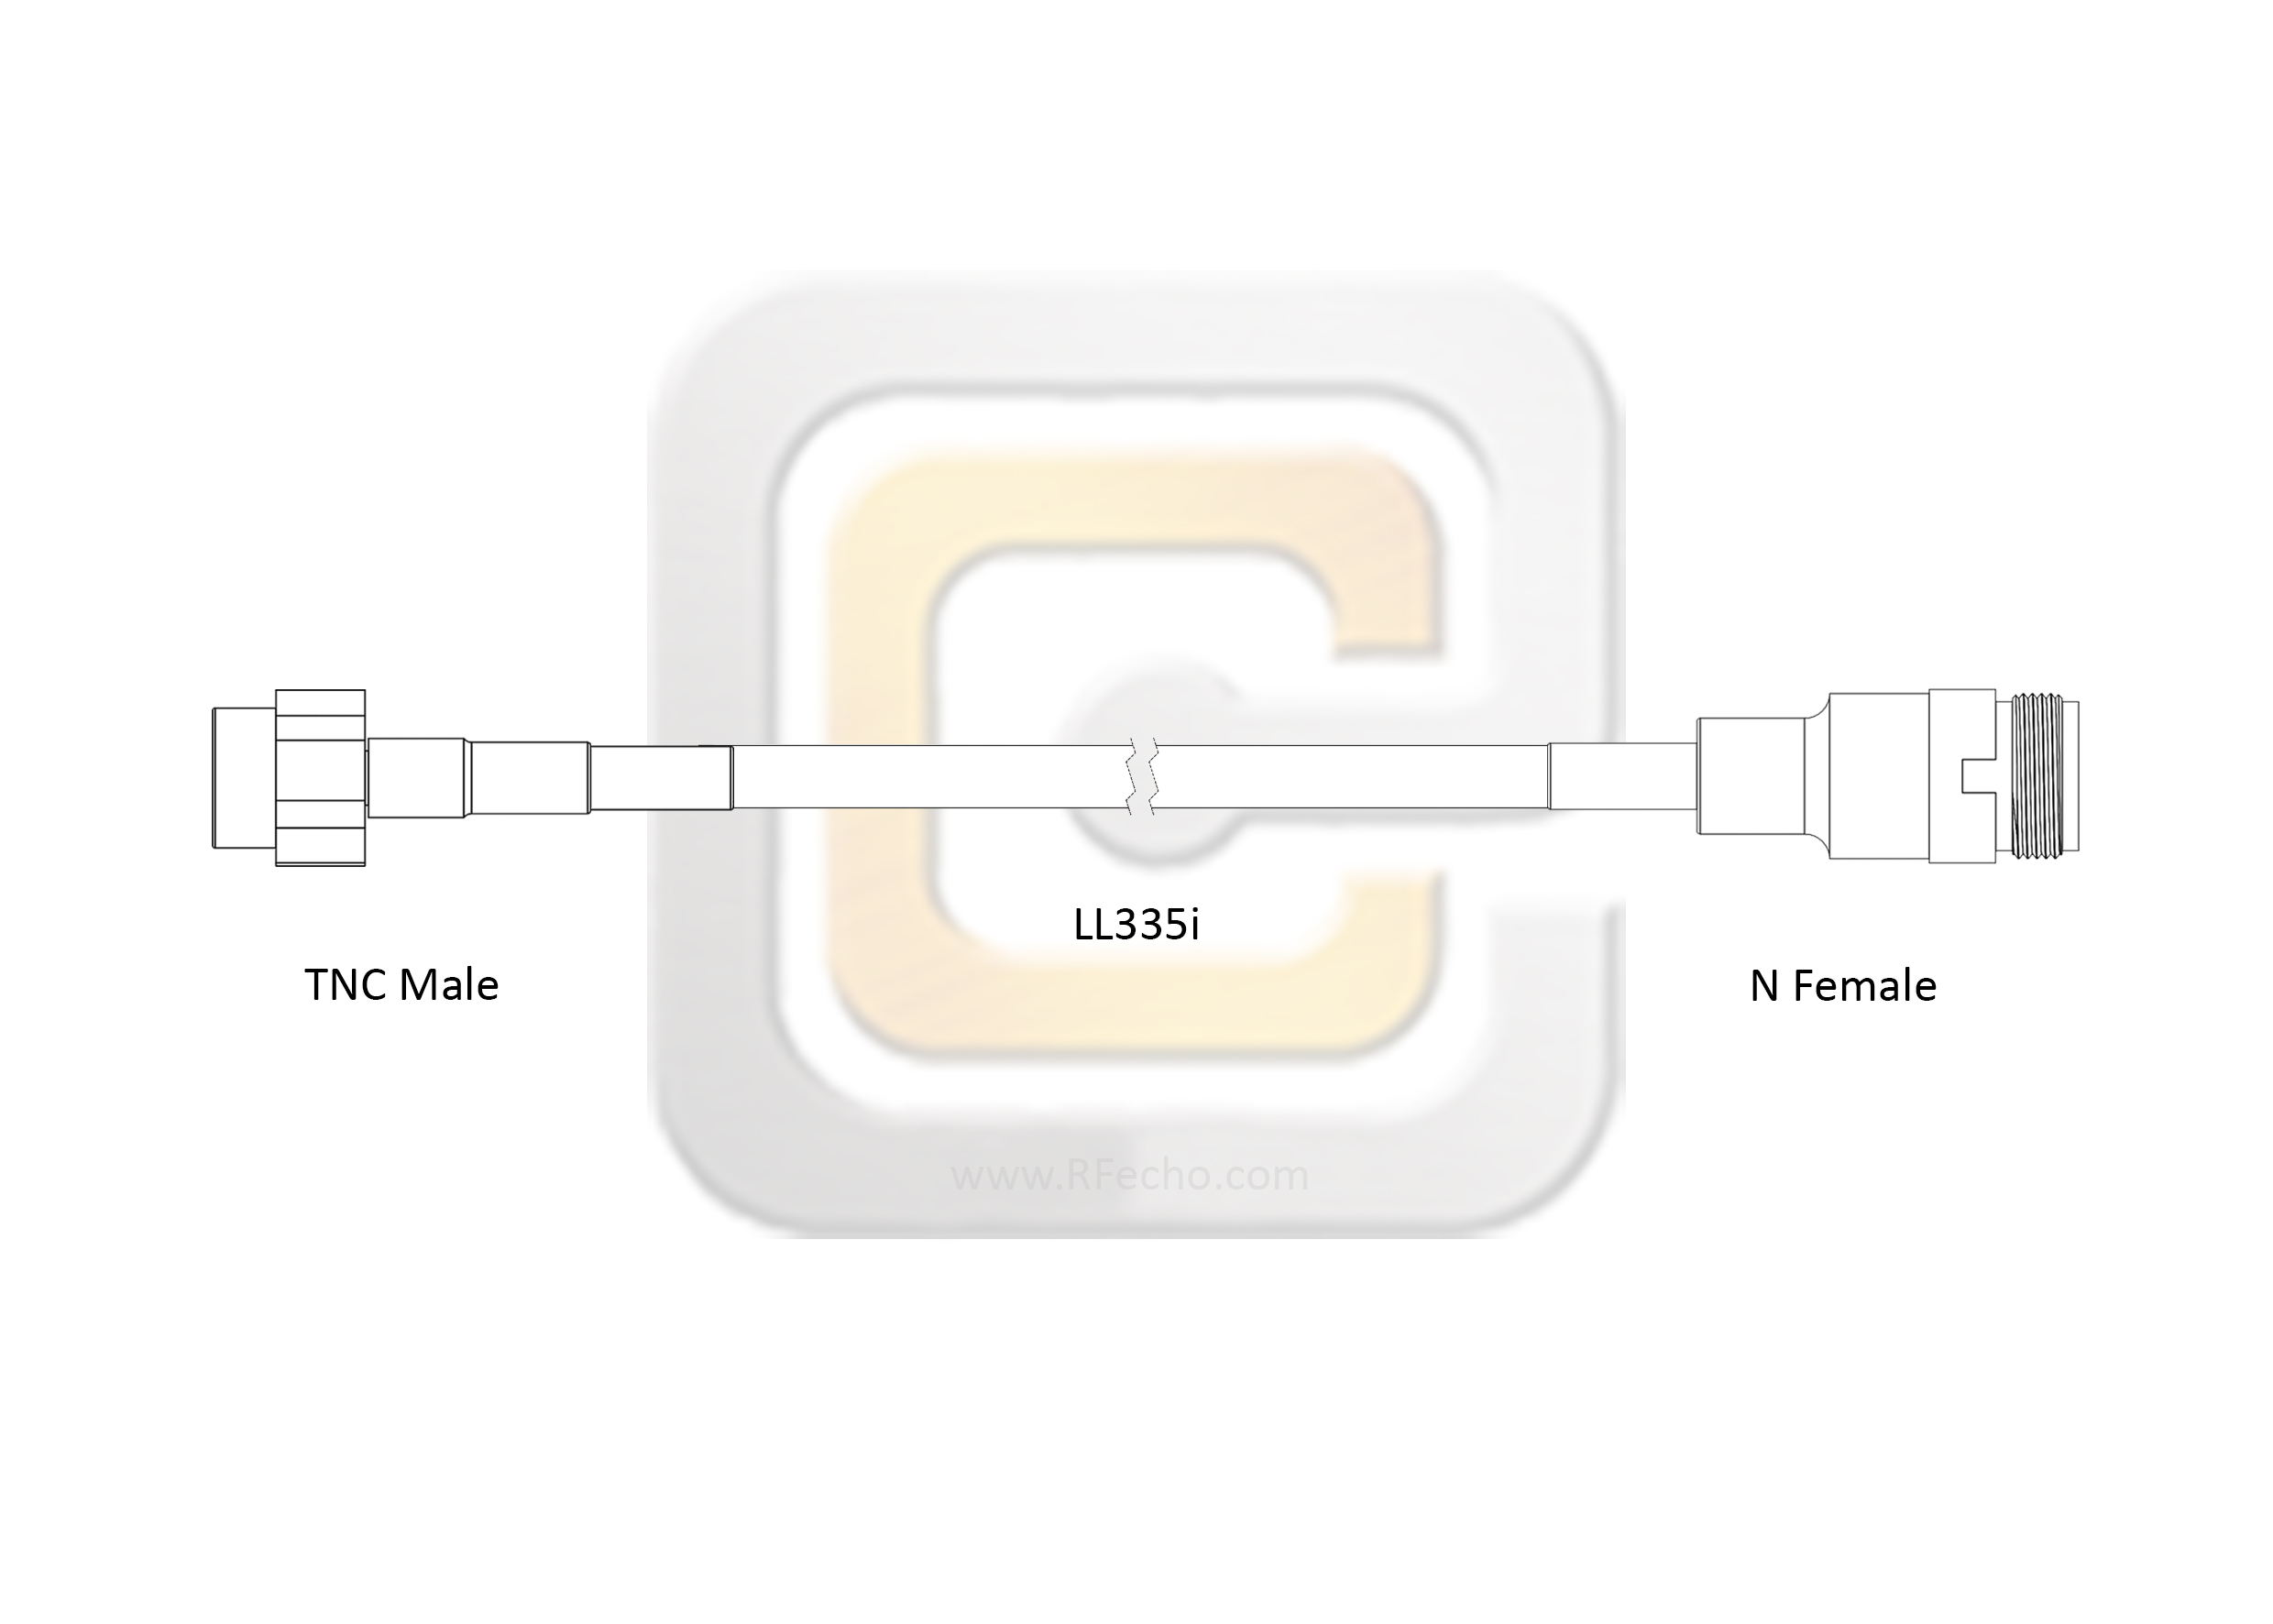 Low Loss TNC Male to N Female, 11 GHz,  LL335i Coax and RoHS